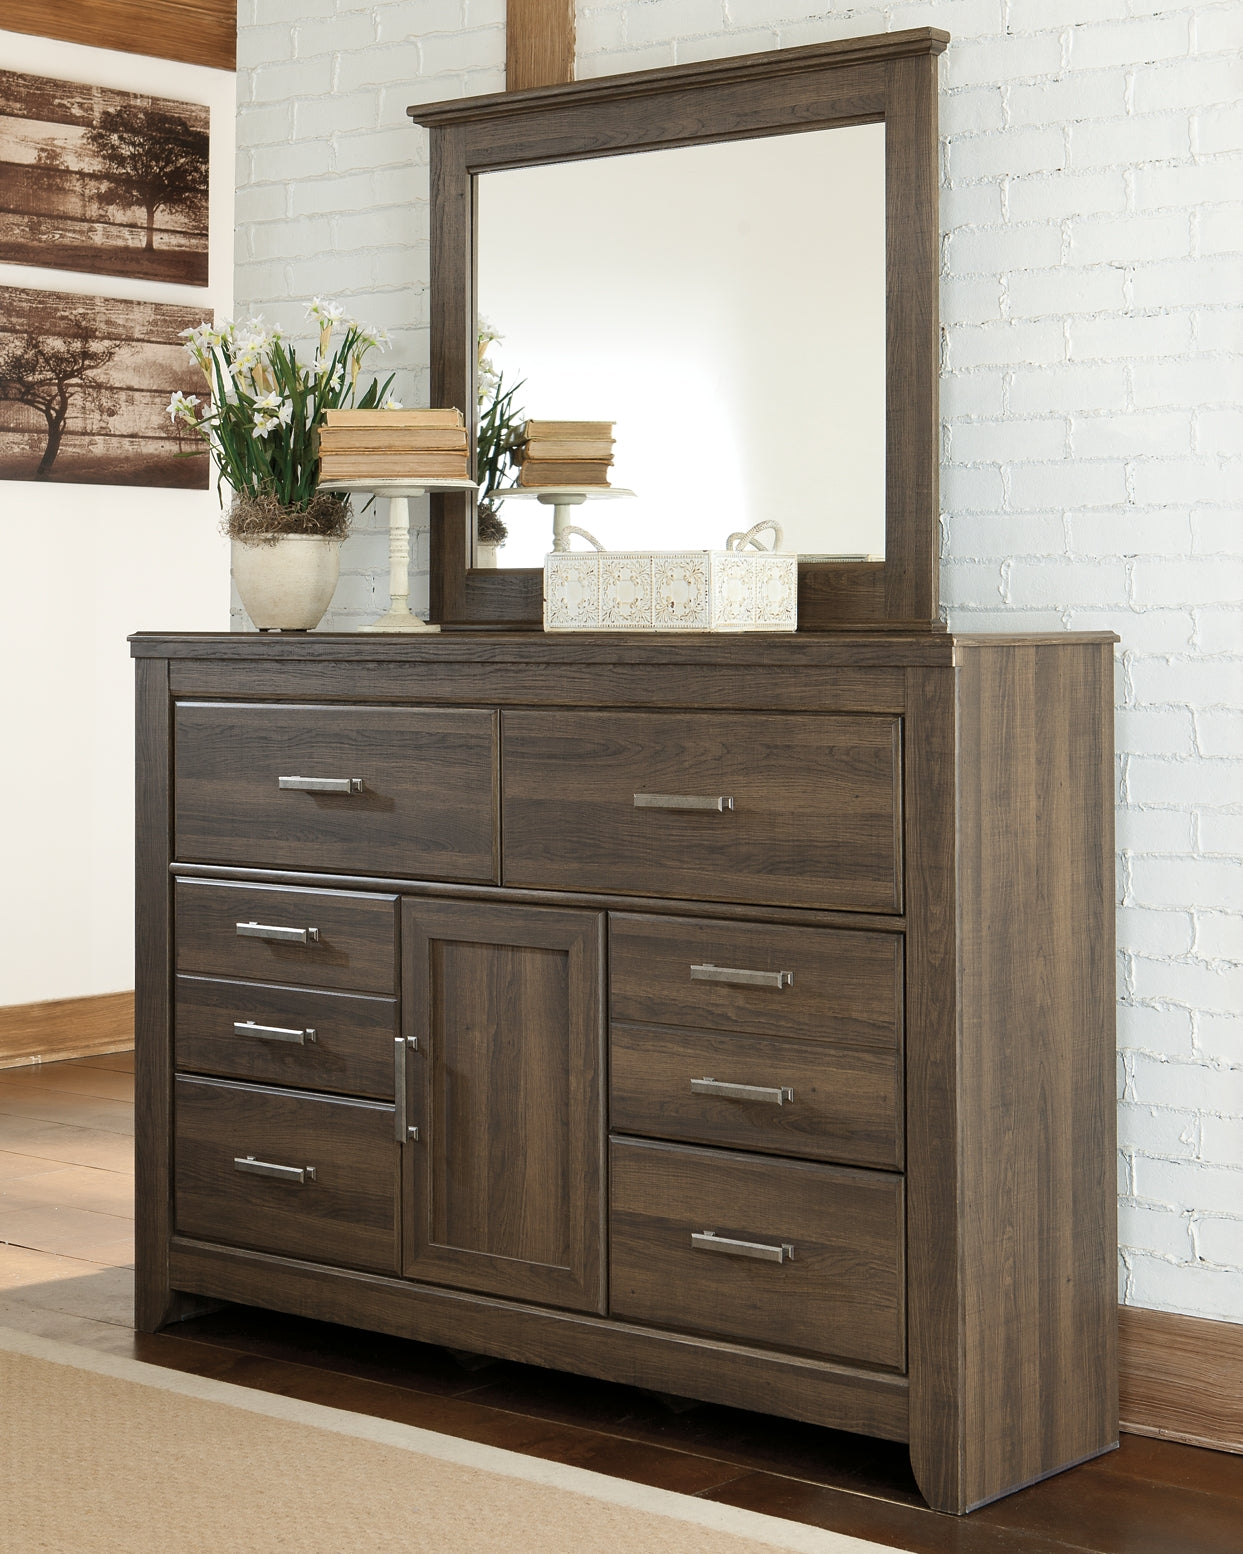 Juararo Queen Panel Bed with Mirrored Dresser, Chest and 2 Nightstands Smyrna Furniture Outlet